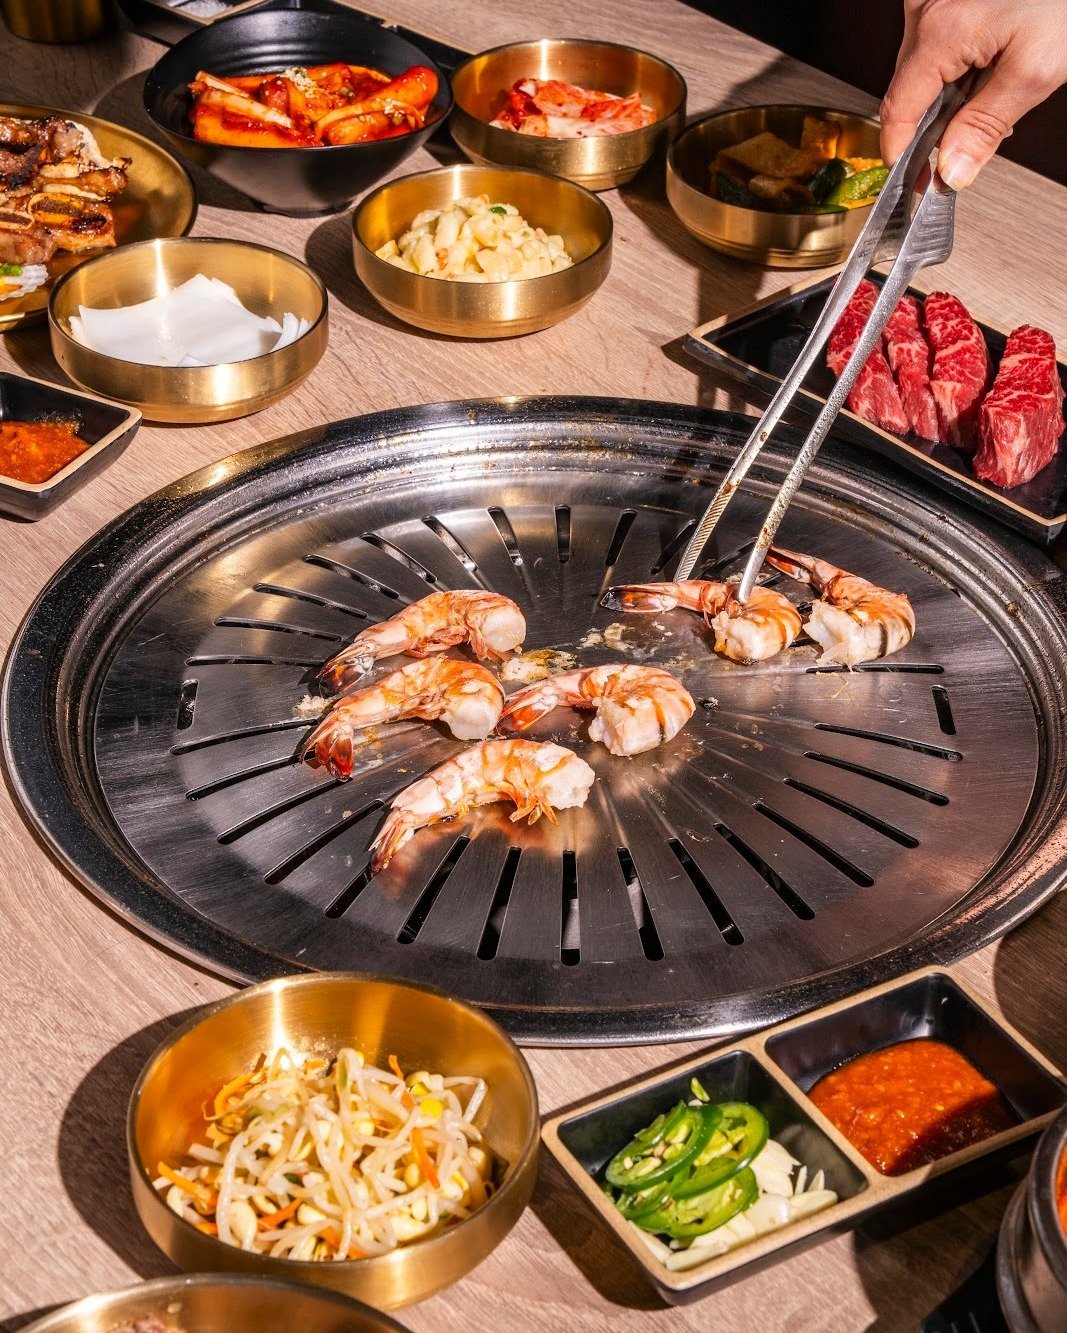 🍤🎉 Happy National Shrimp Day! 🎉🍤 Shrimp lovers unite with our special shrimp offerings! 🦐 Head-On Shrimp available for Set B and Set C, while Black Tiger Shrimp is a must-try for Set C! Don't miss out on this flavorful celebration! 🌟 

#88qkbbq